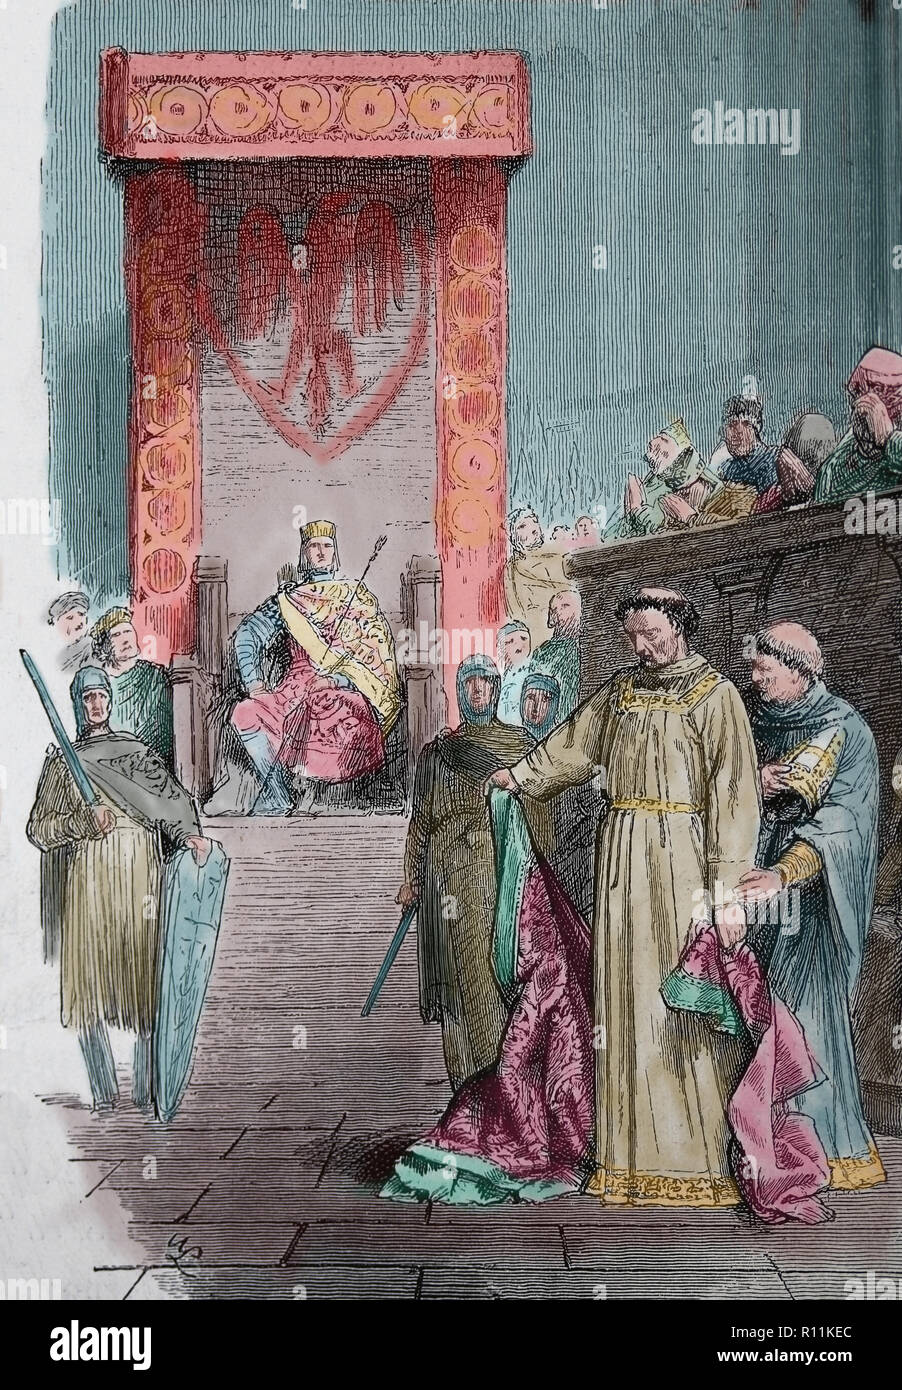 Synod of Sutri, Italy. Chaired by Holy Roman Emperor Henry III, 1046. The objective was resolve disorder over the papacy. Engraving, 1882. Stock Photo